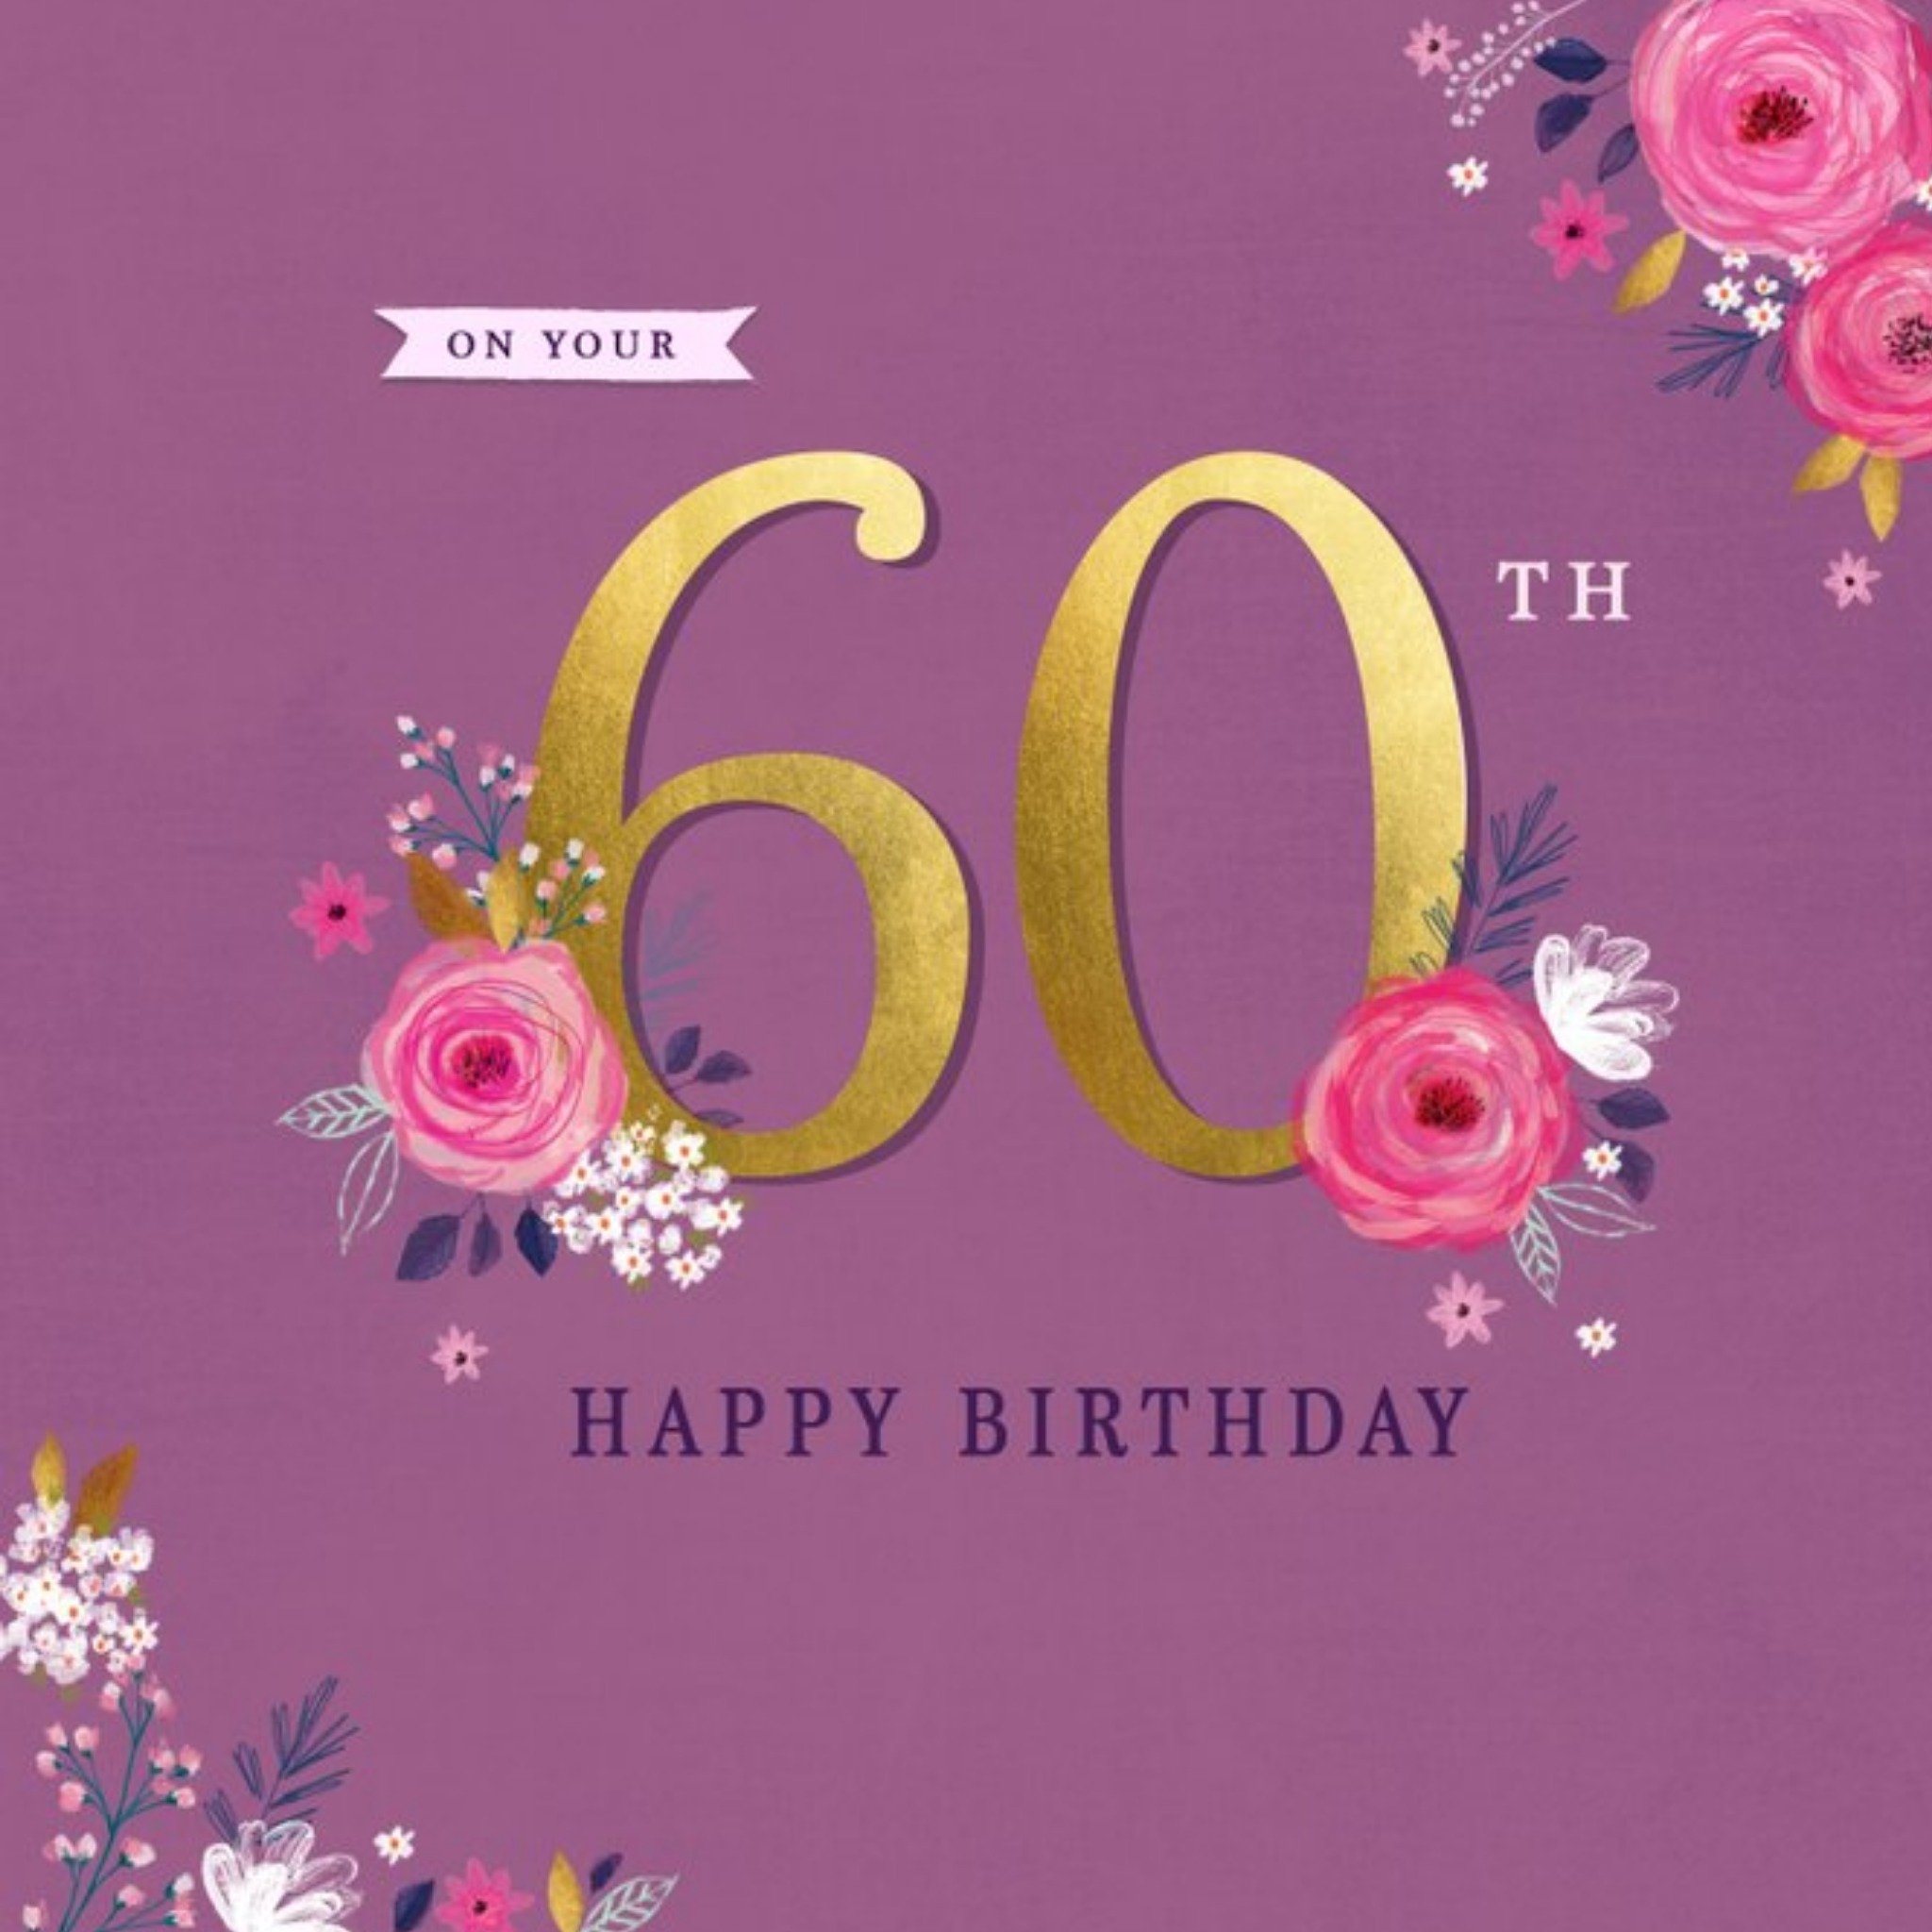 Moonpig Typographic Design Floral On Your 60th Birthday Wishes Card, Large